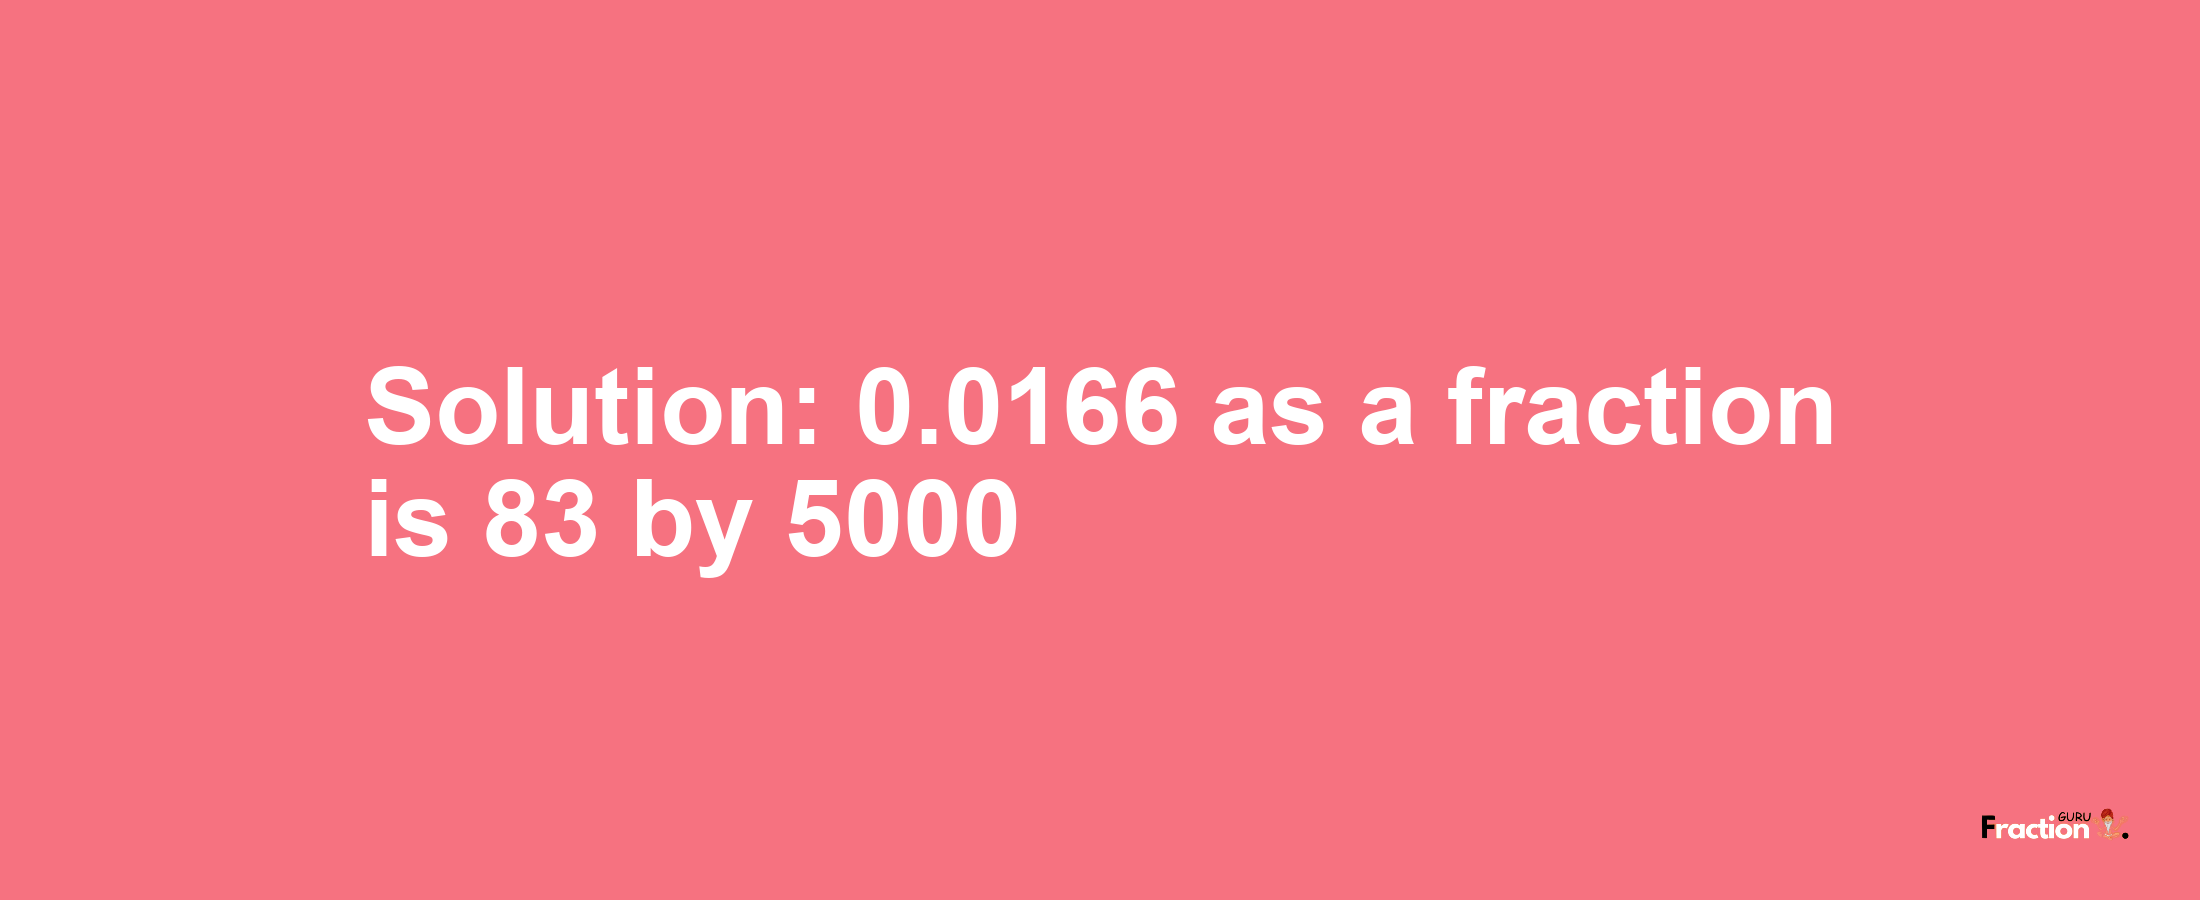 Solution:0.0166 as a fraction is 83/5000